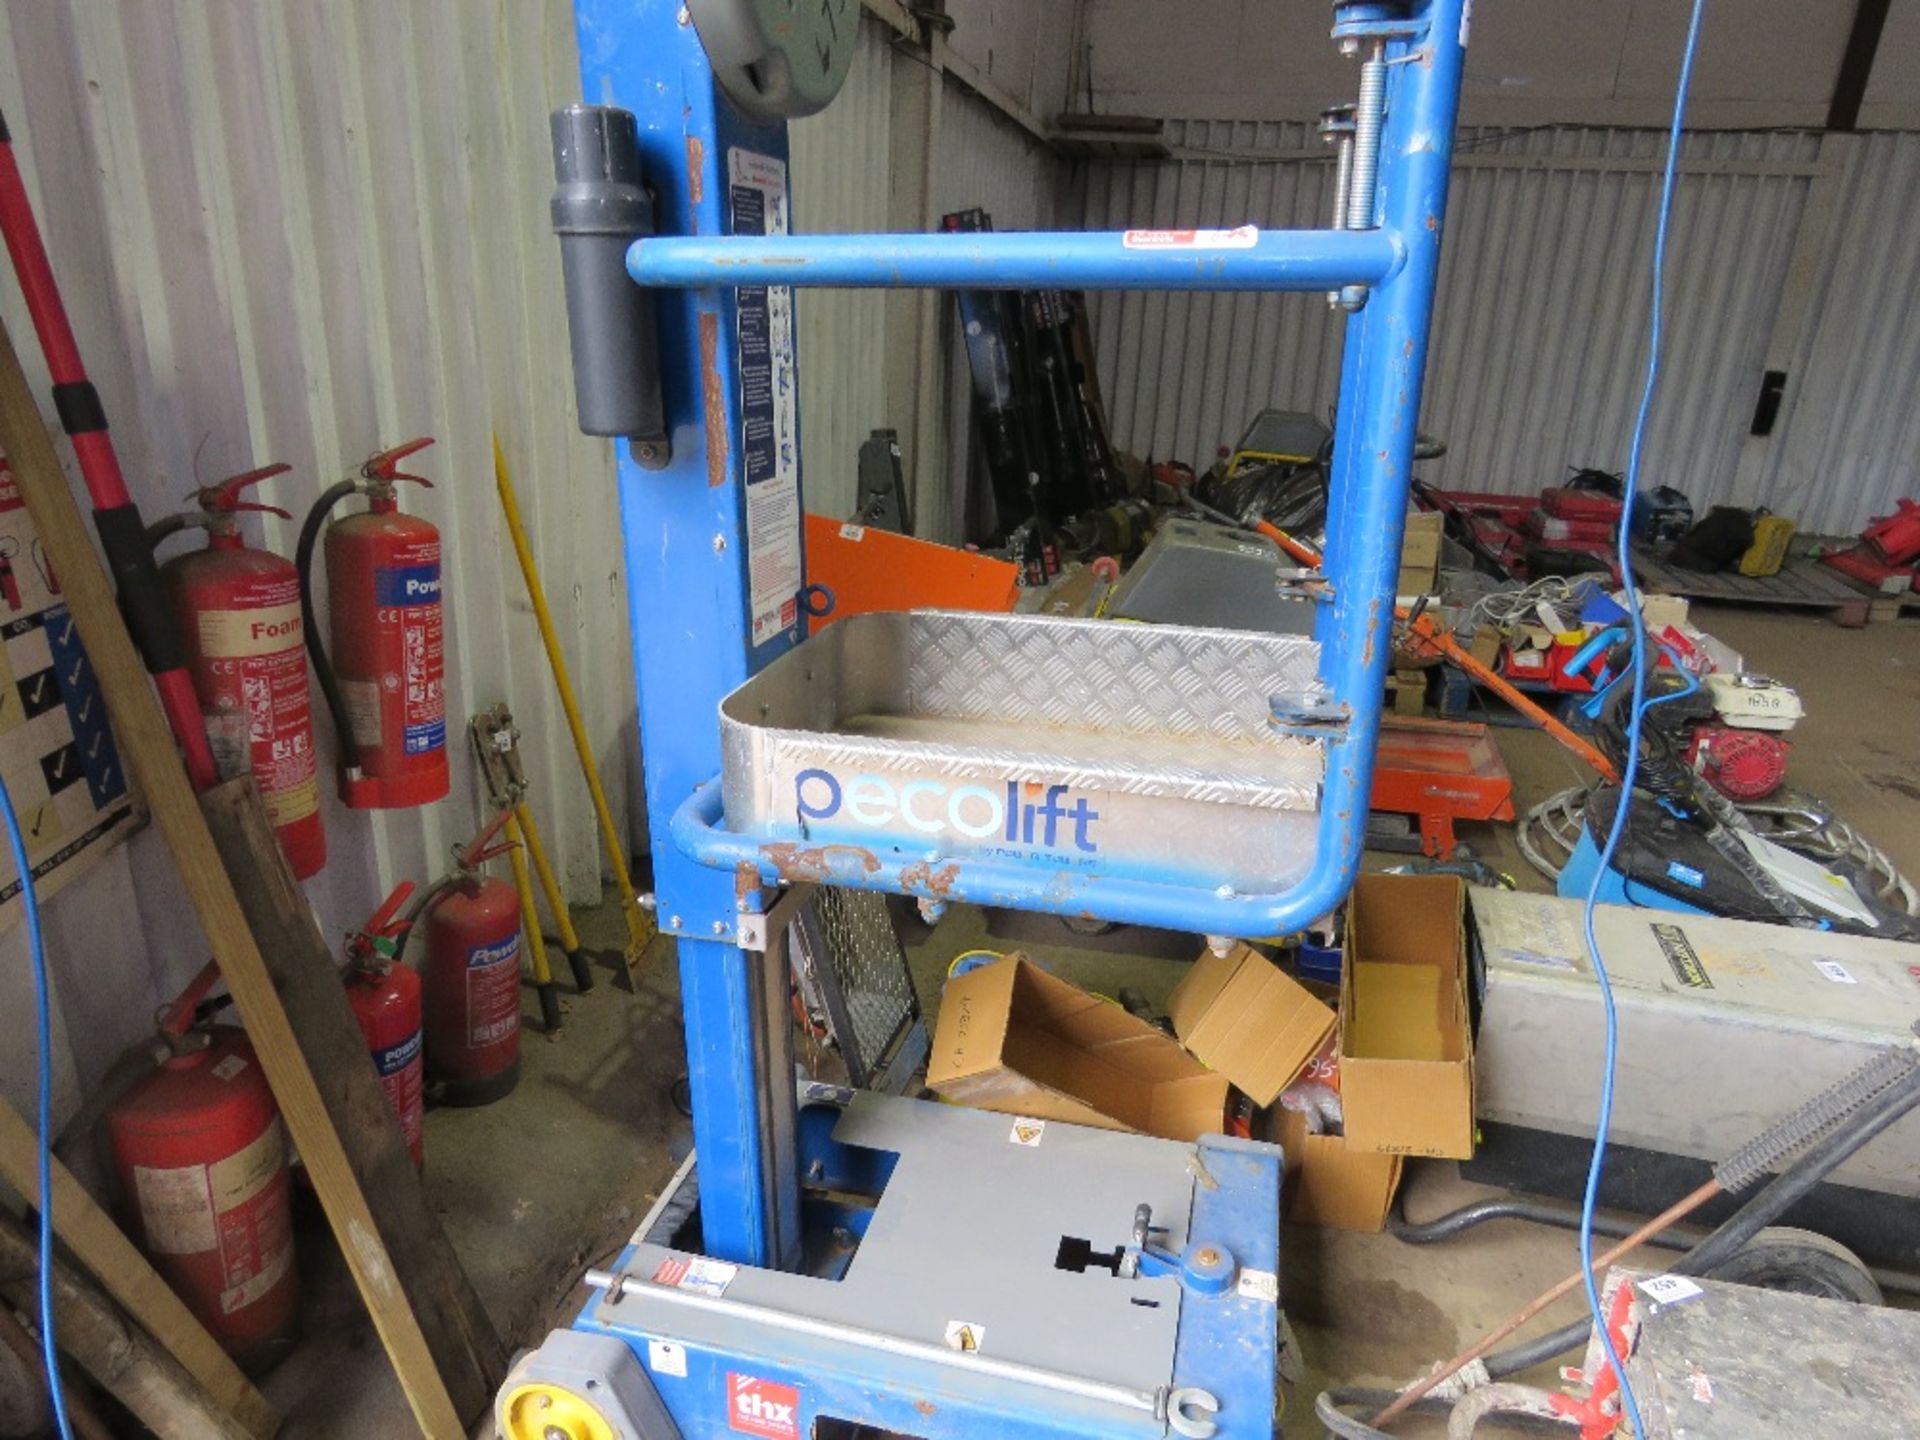 PECOLIFT MAST TYPE MANUAL OPERATED PERSONEL LIFT. YEAR 2017 BUILD. THX4792.